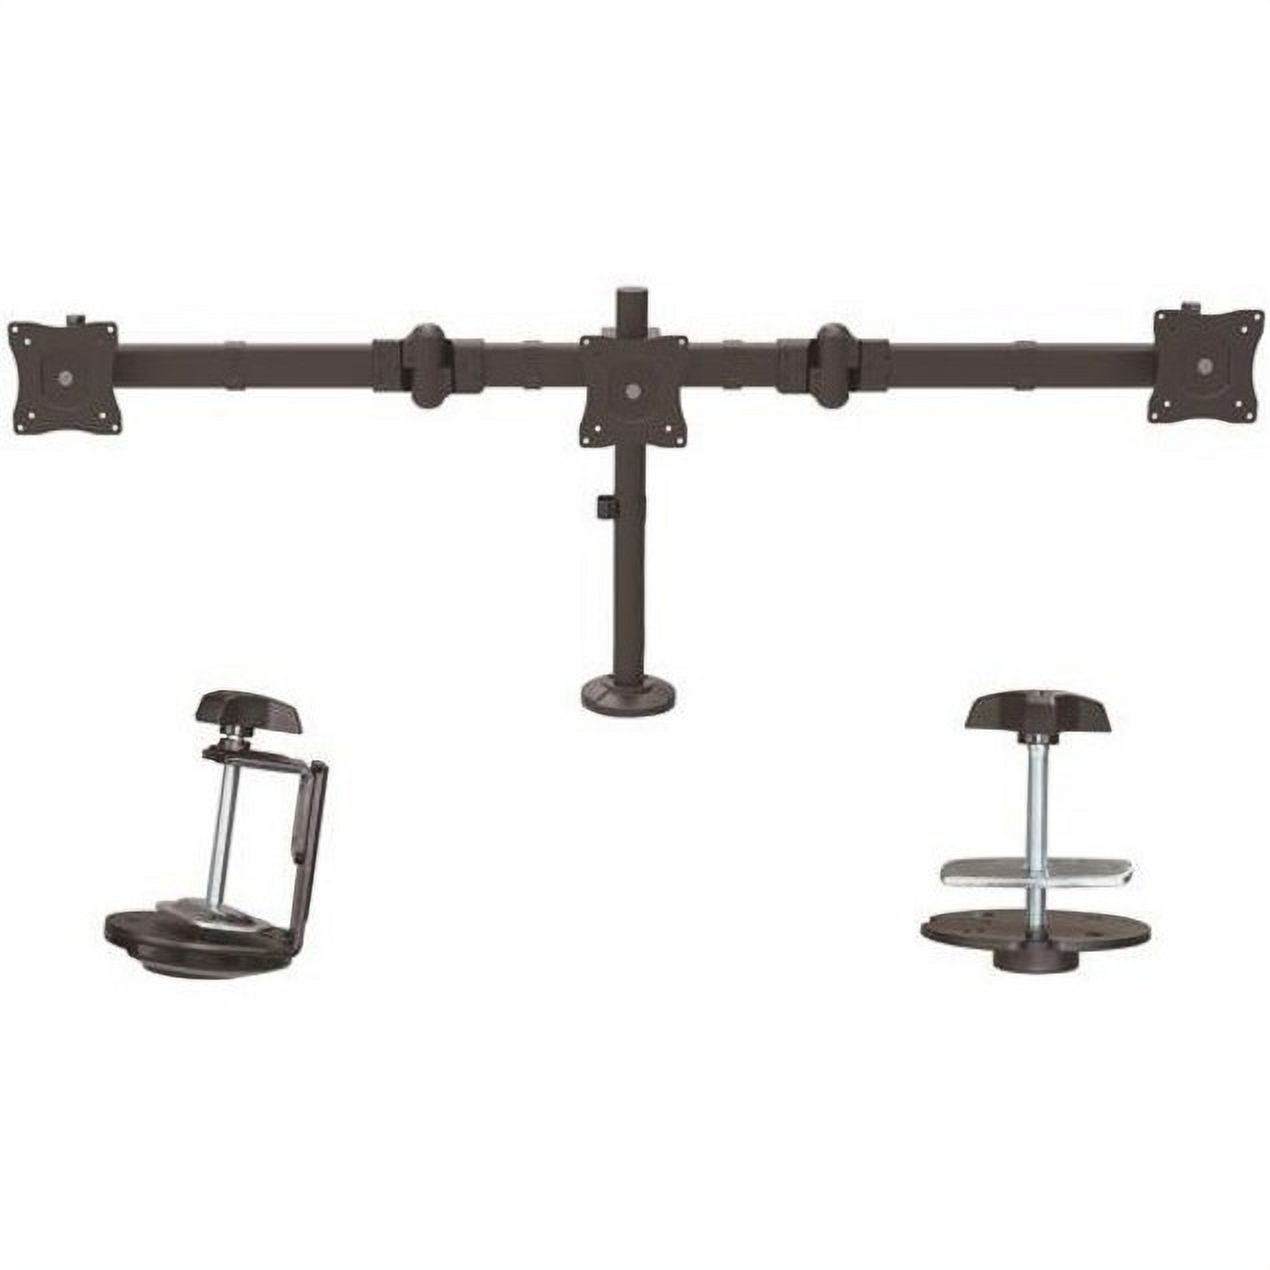 Startech ARMTRIO Desk-Mount Triple Monitor Arm - Articulating for up to 24” Monitors - image 4 of 7